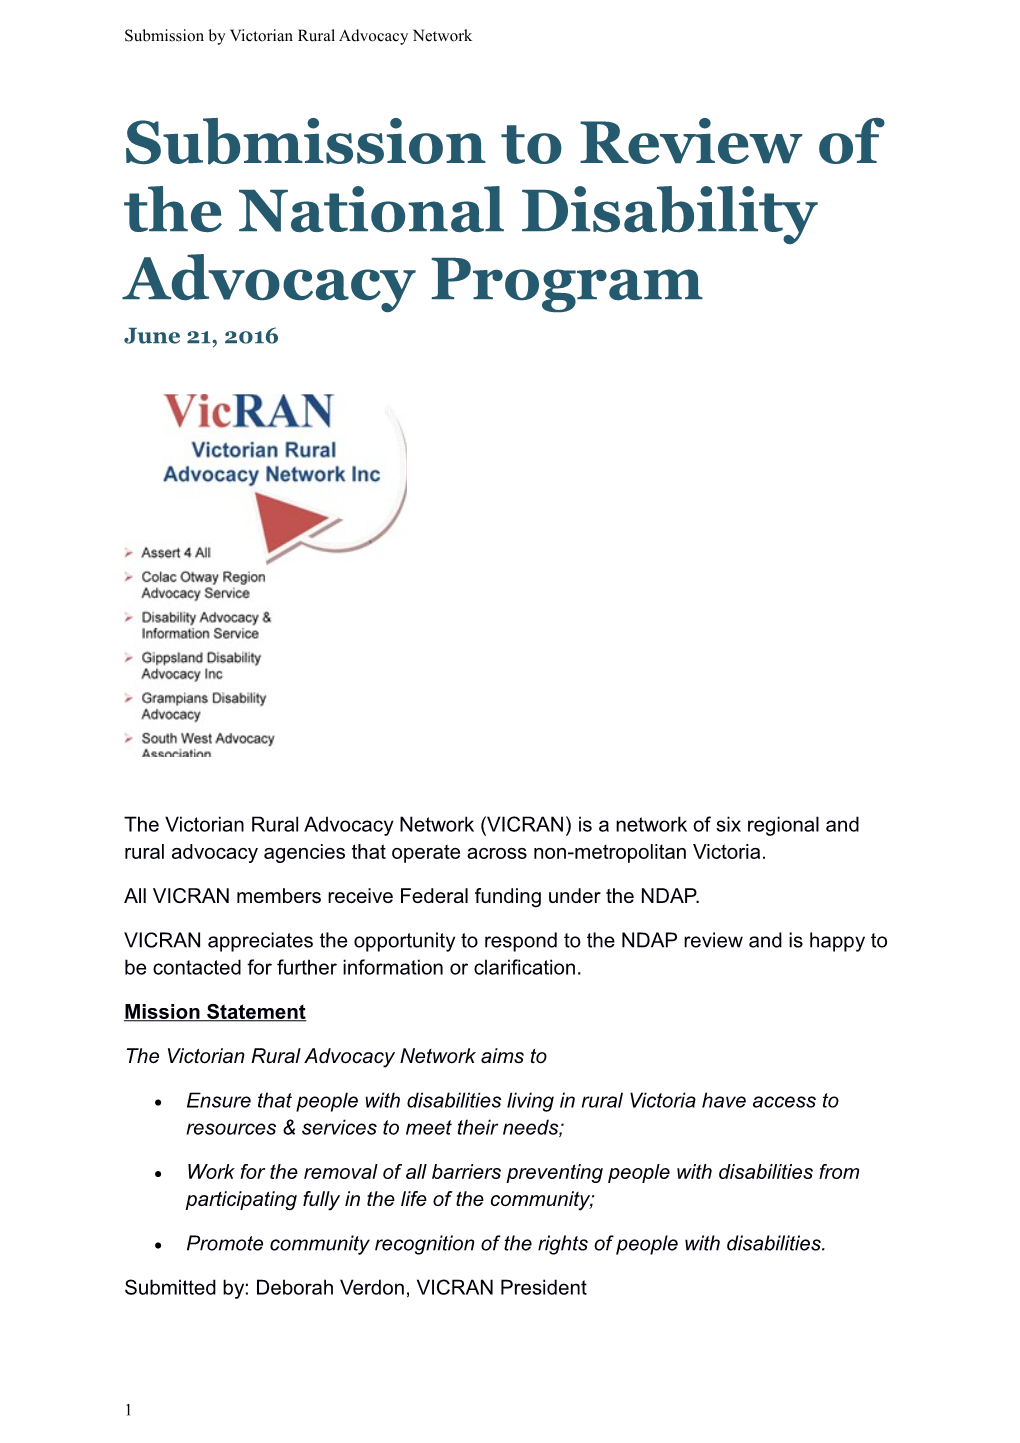 Submission to Review of the National Disability Advocacy Program